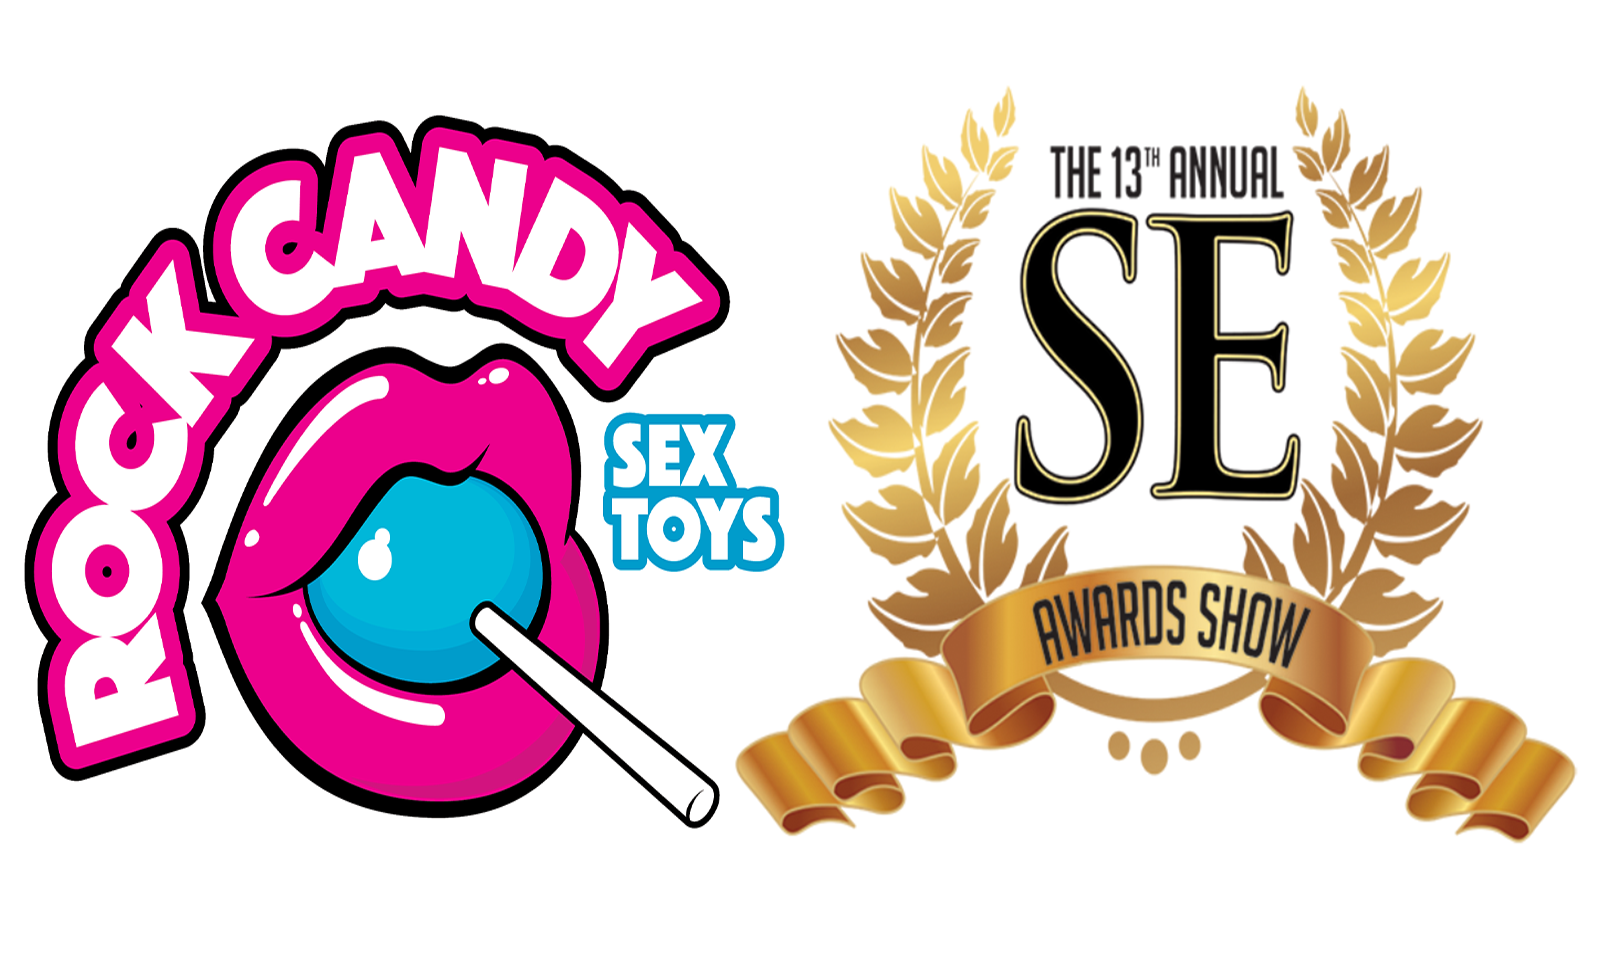 Rock Candy Toys Earns 3 StorErotica Awards Nominations